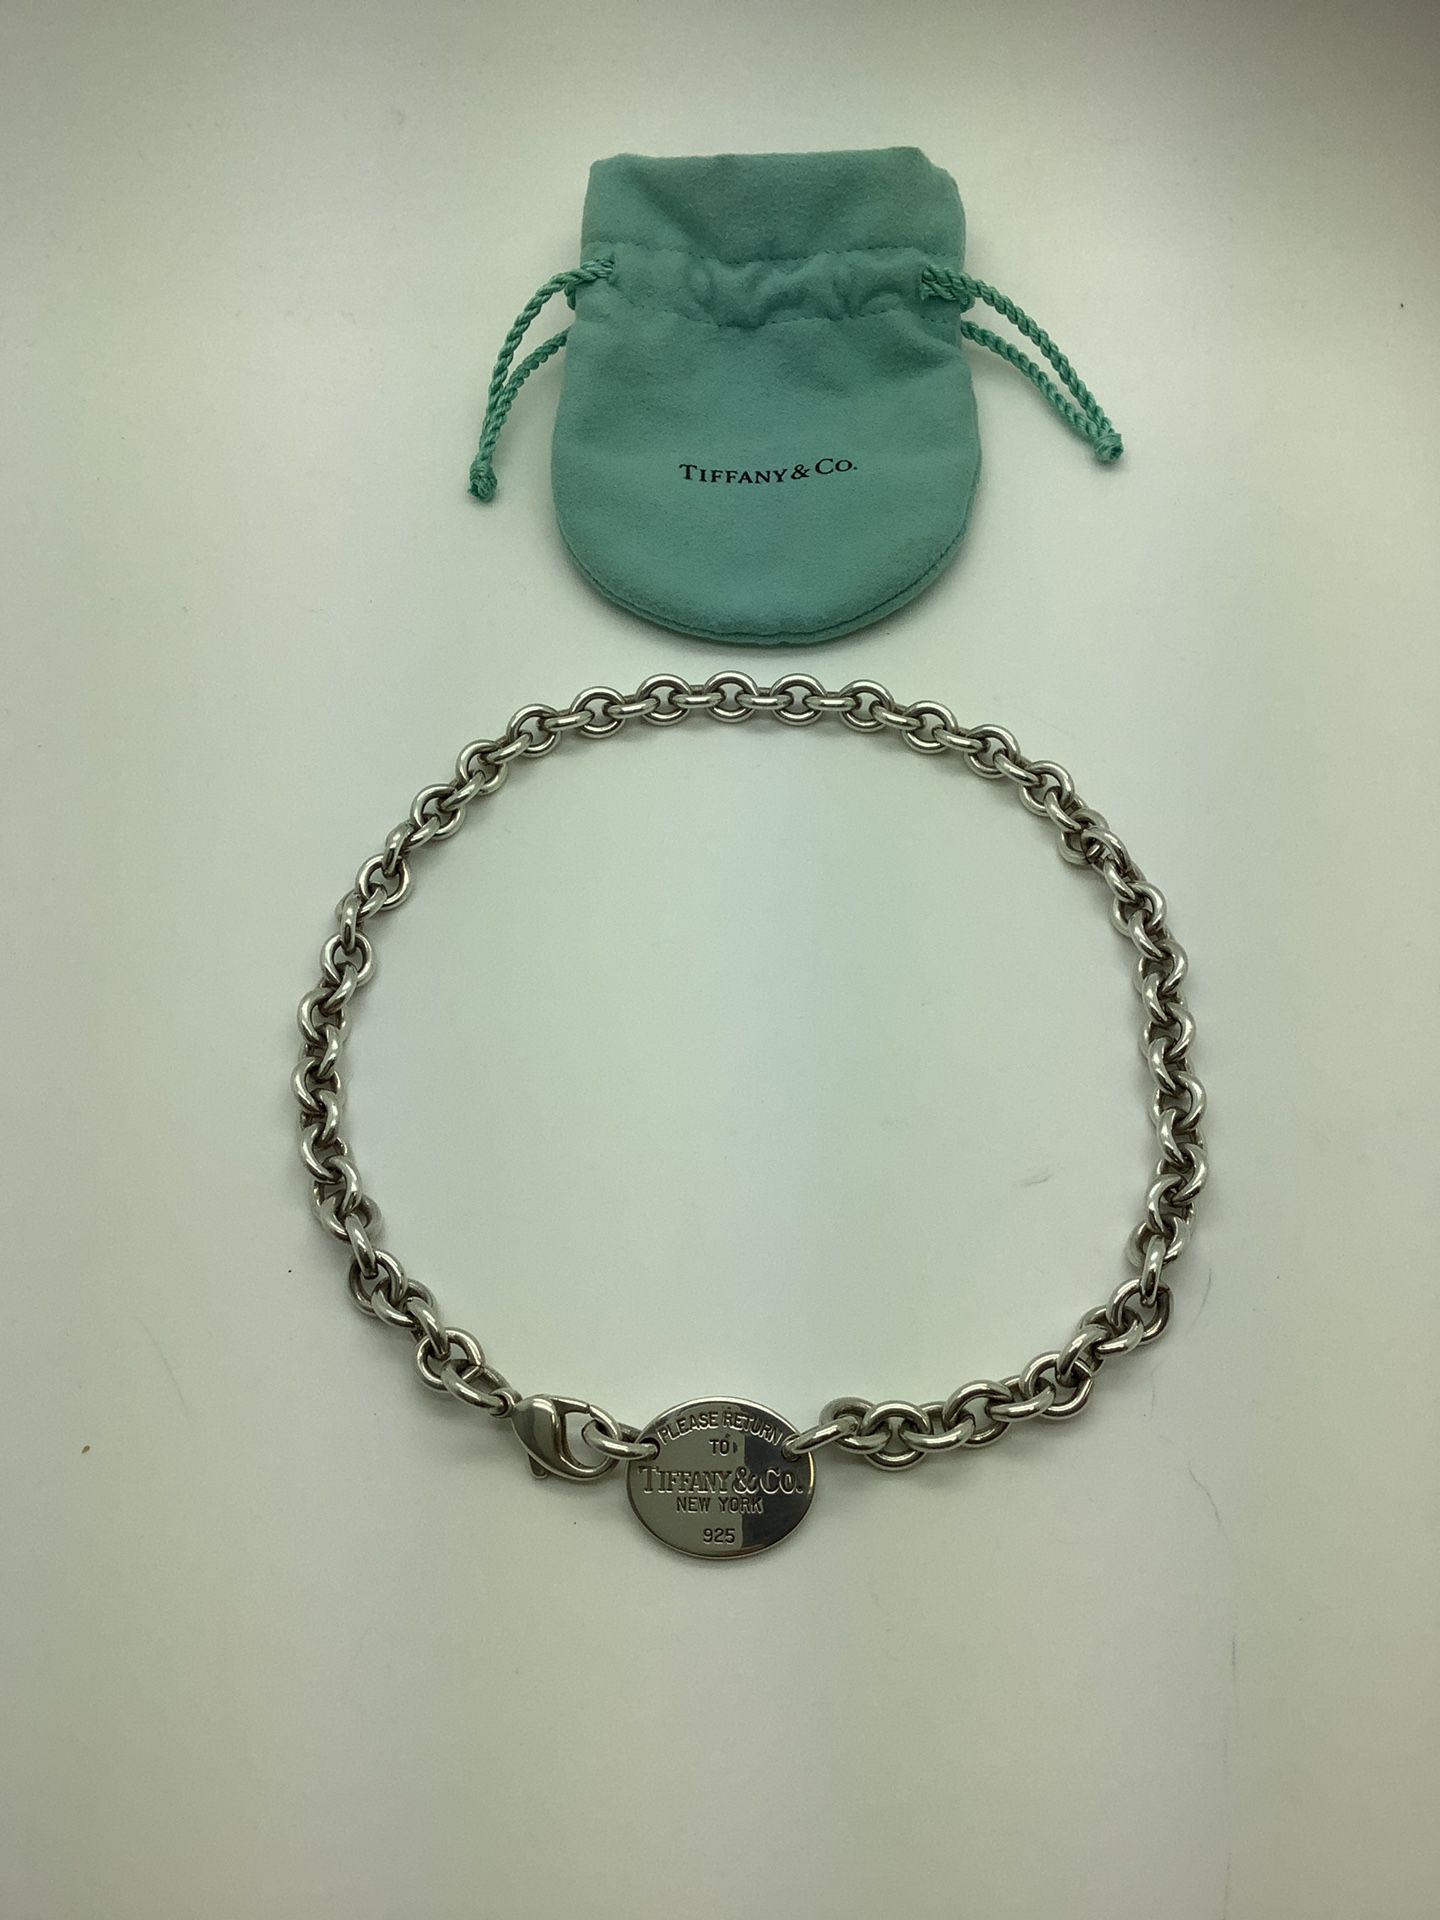 Tiffany & Co. 925/Silver Necklace Oval “Please Return To Tiffany” 16” Long